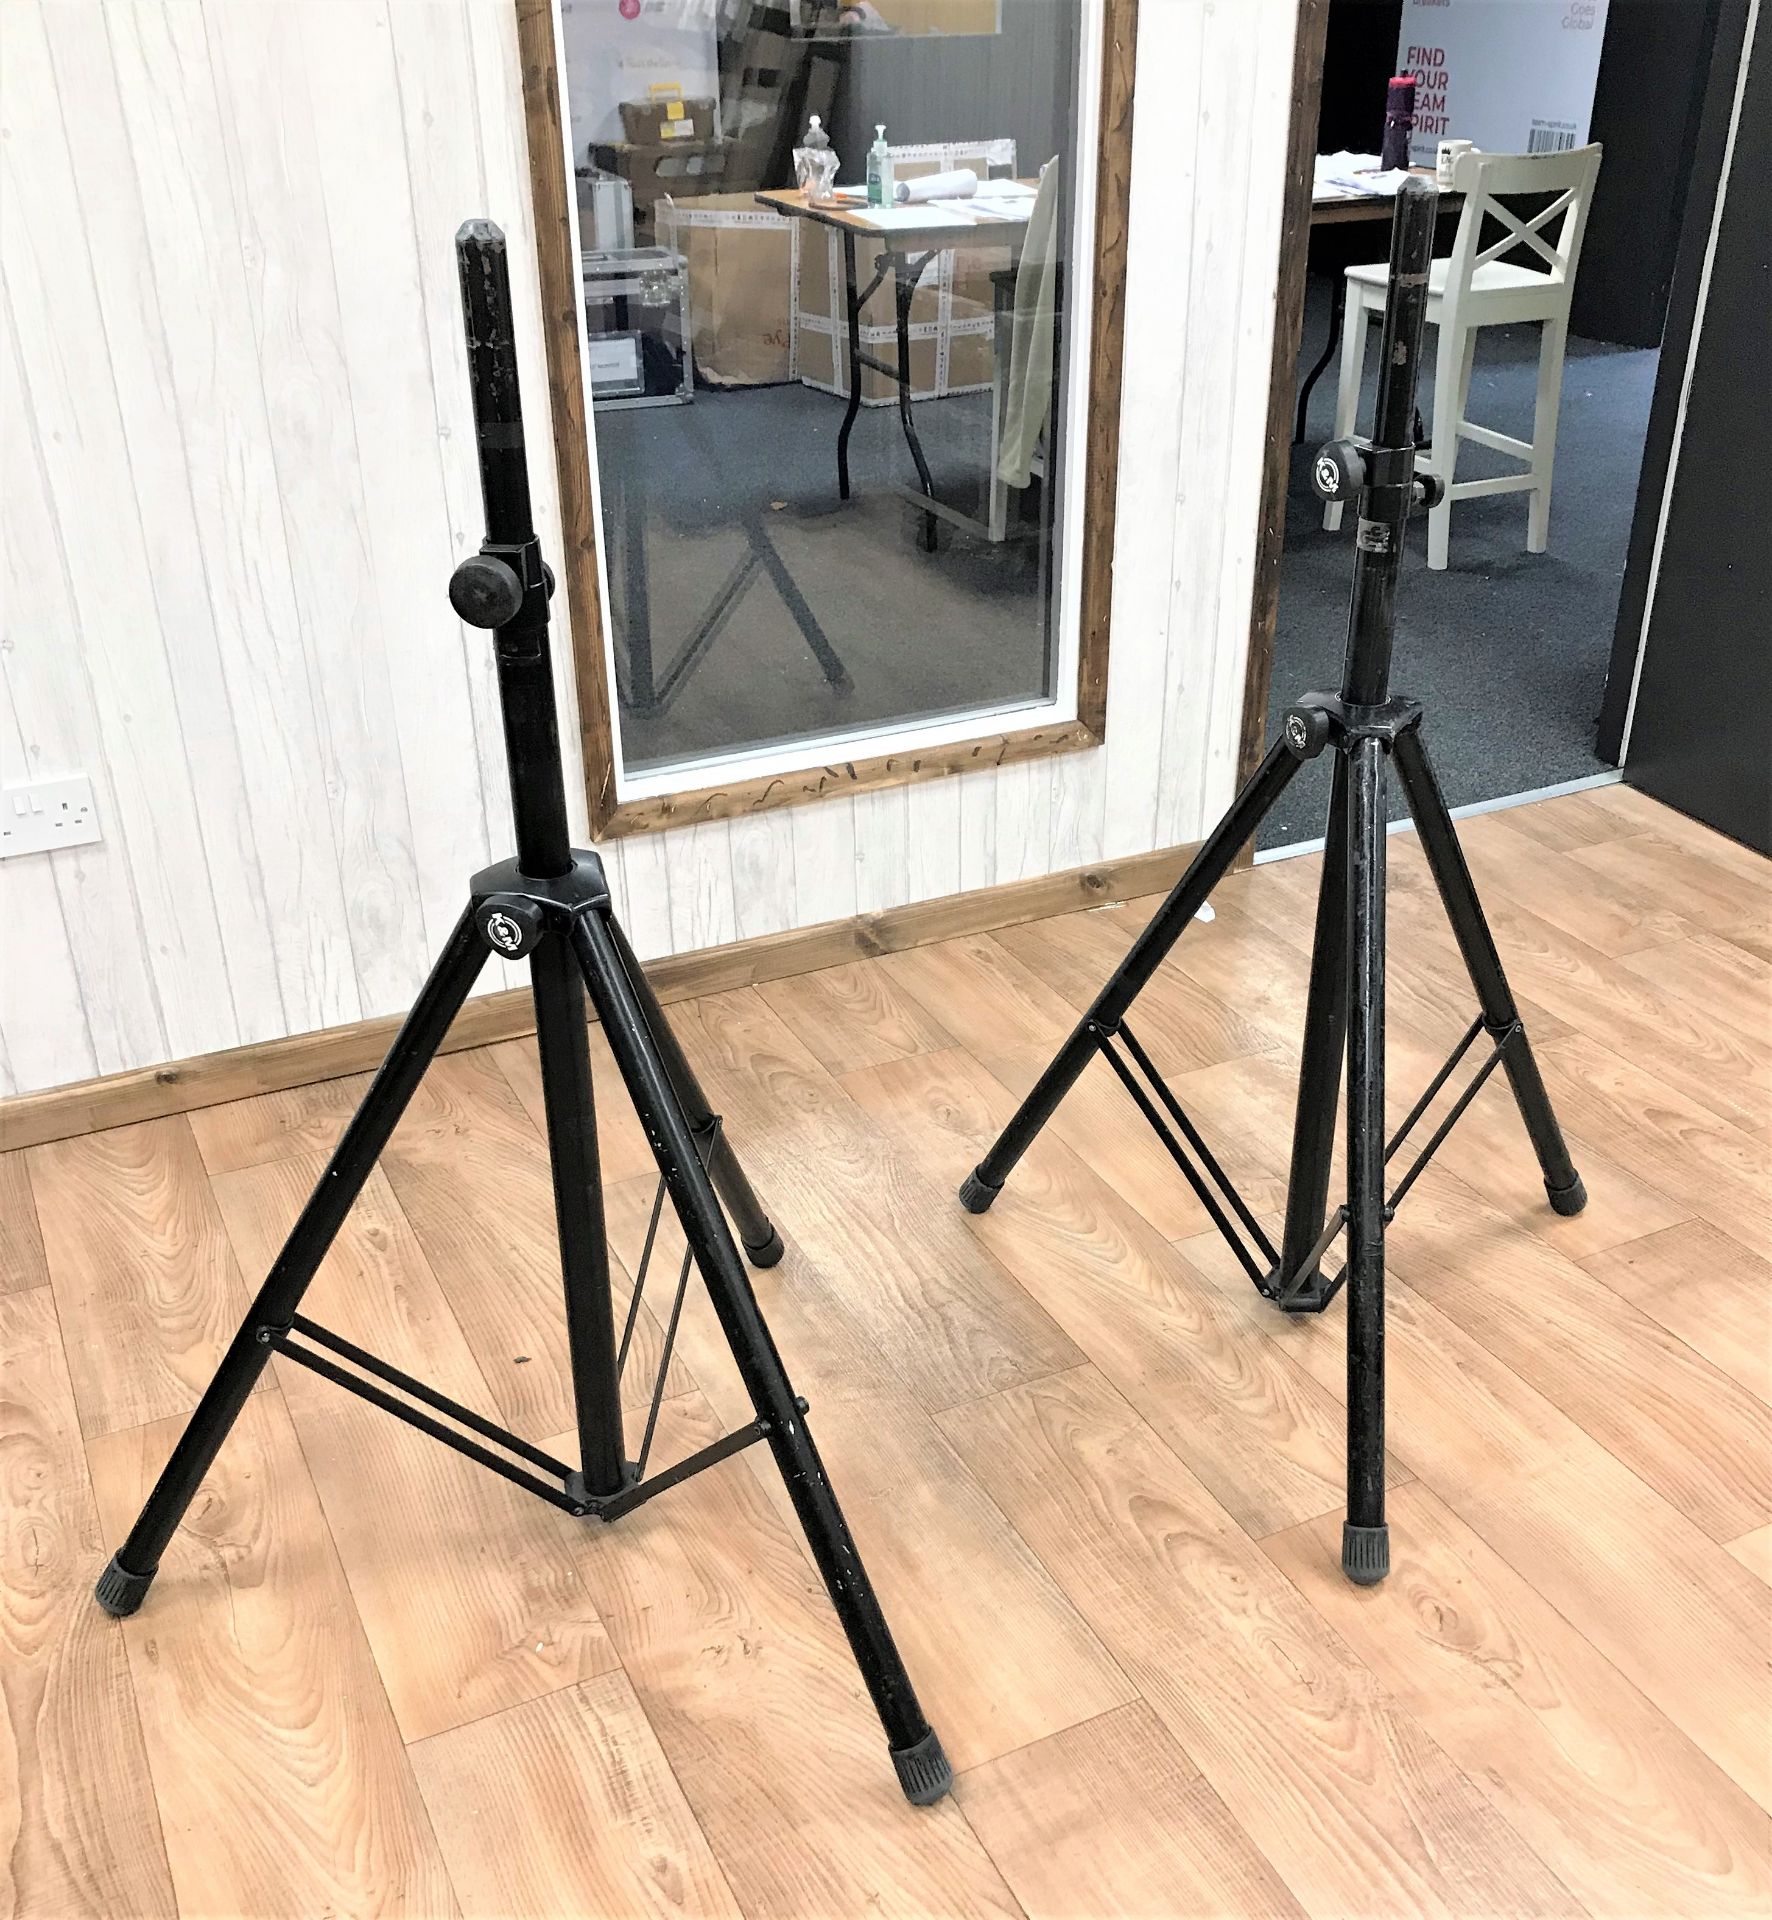 A Pair of K+M Heavy Duty Speaker Stands with Citronic Carry Bag (located at ADA Support, 178 Burnley